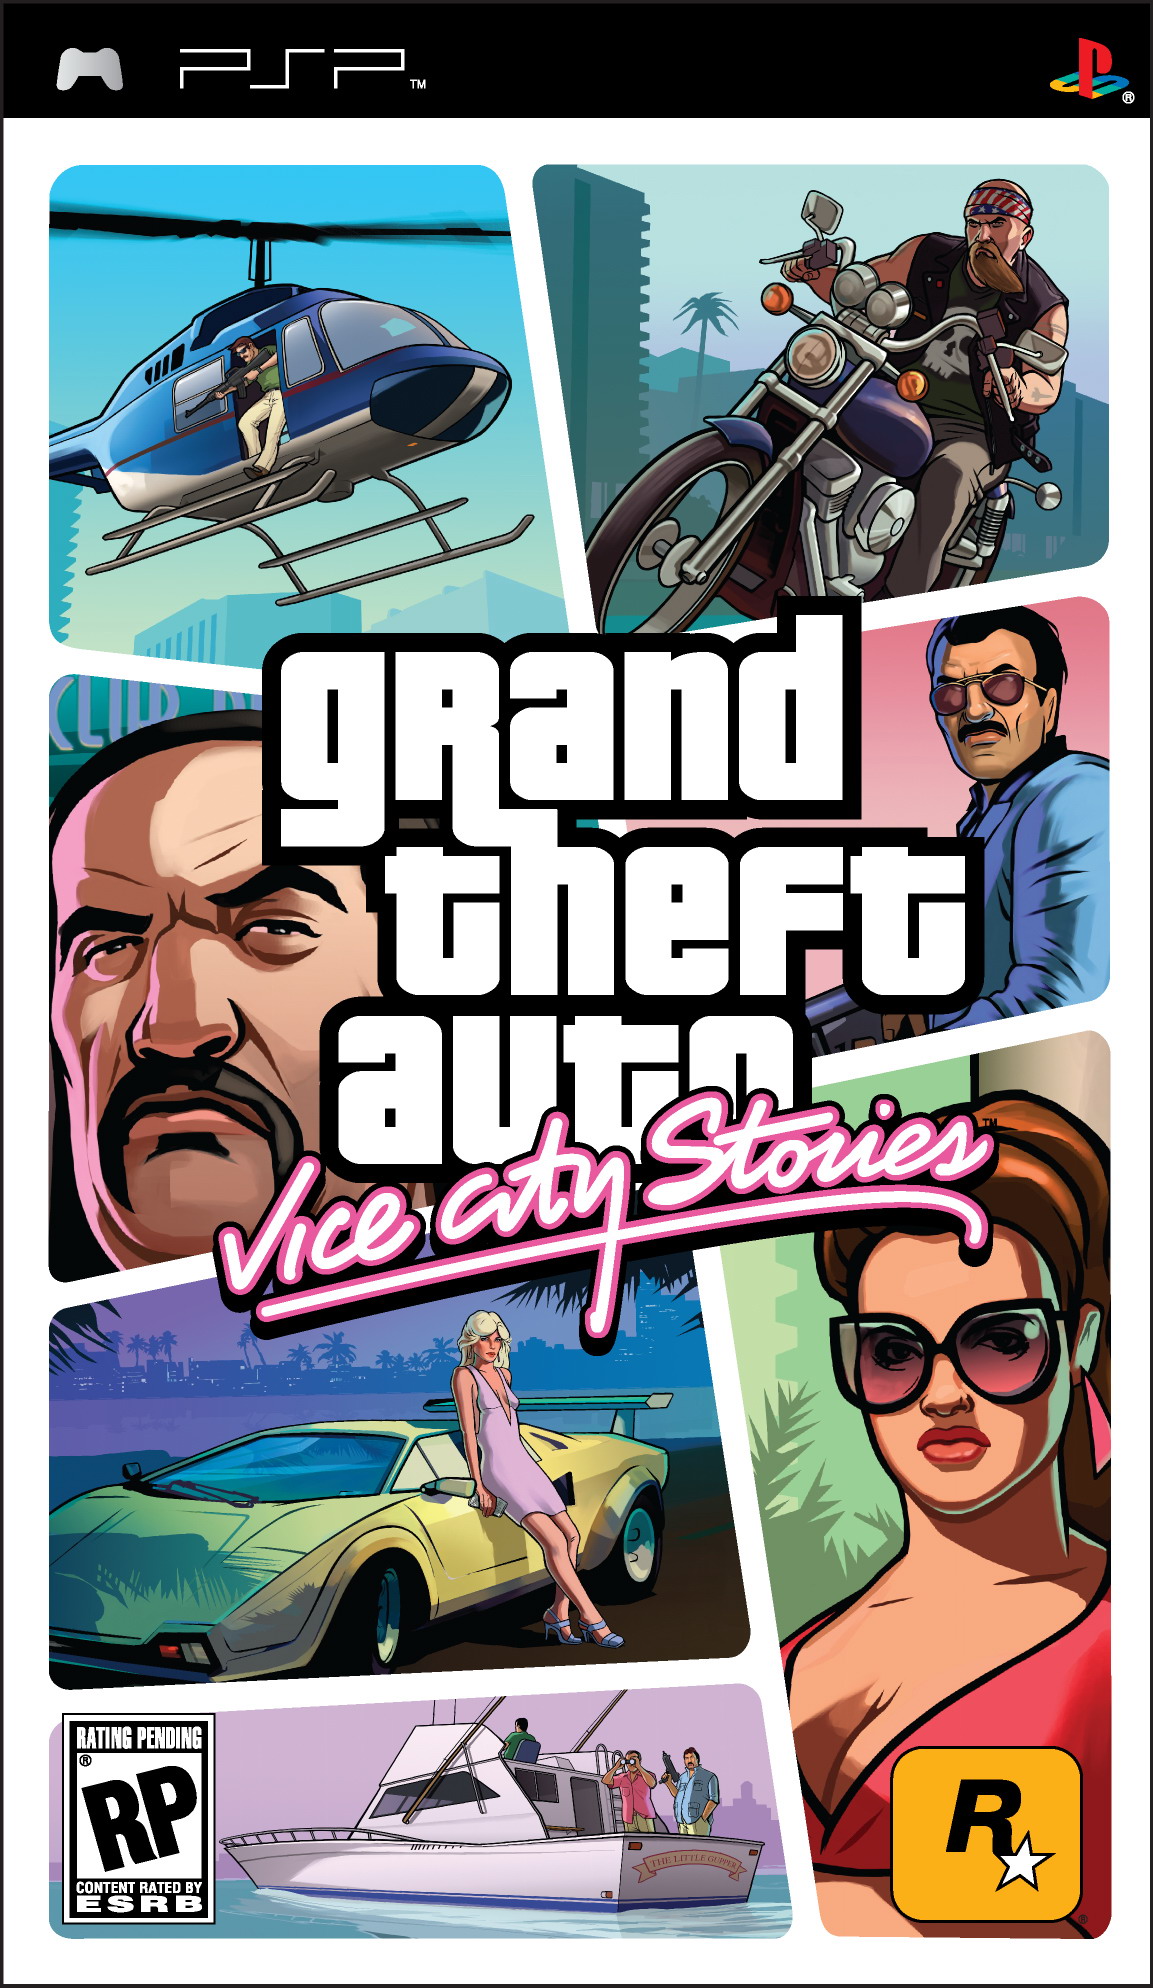 gta vice city stories mobile device